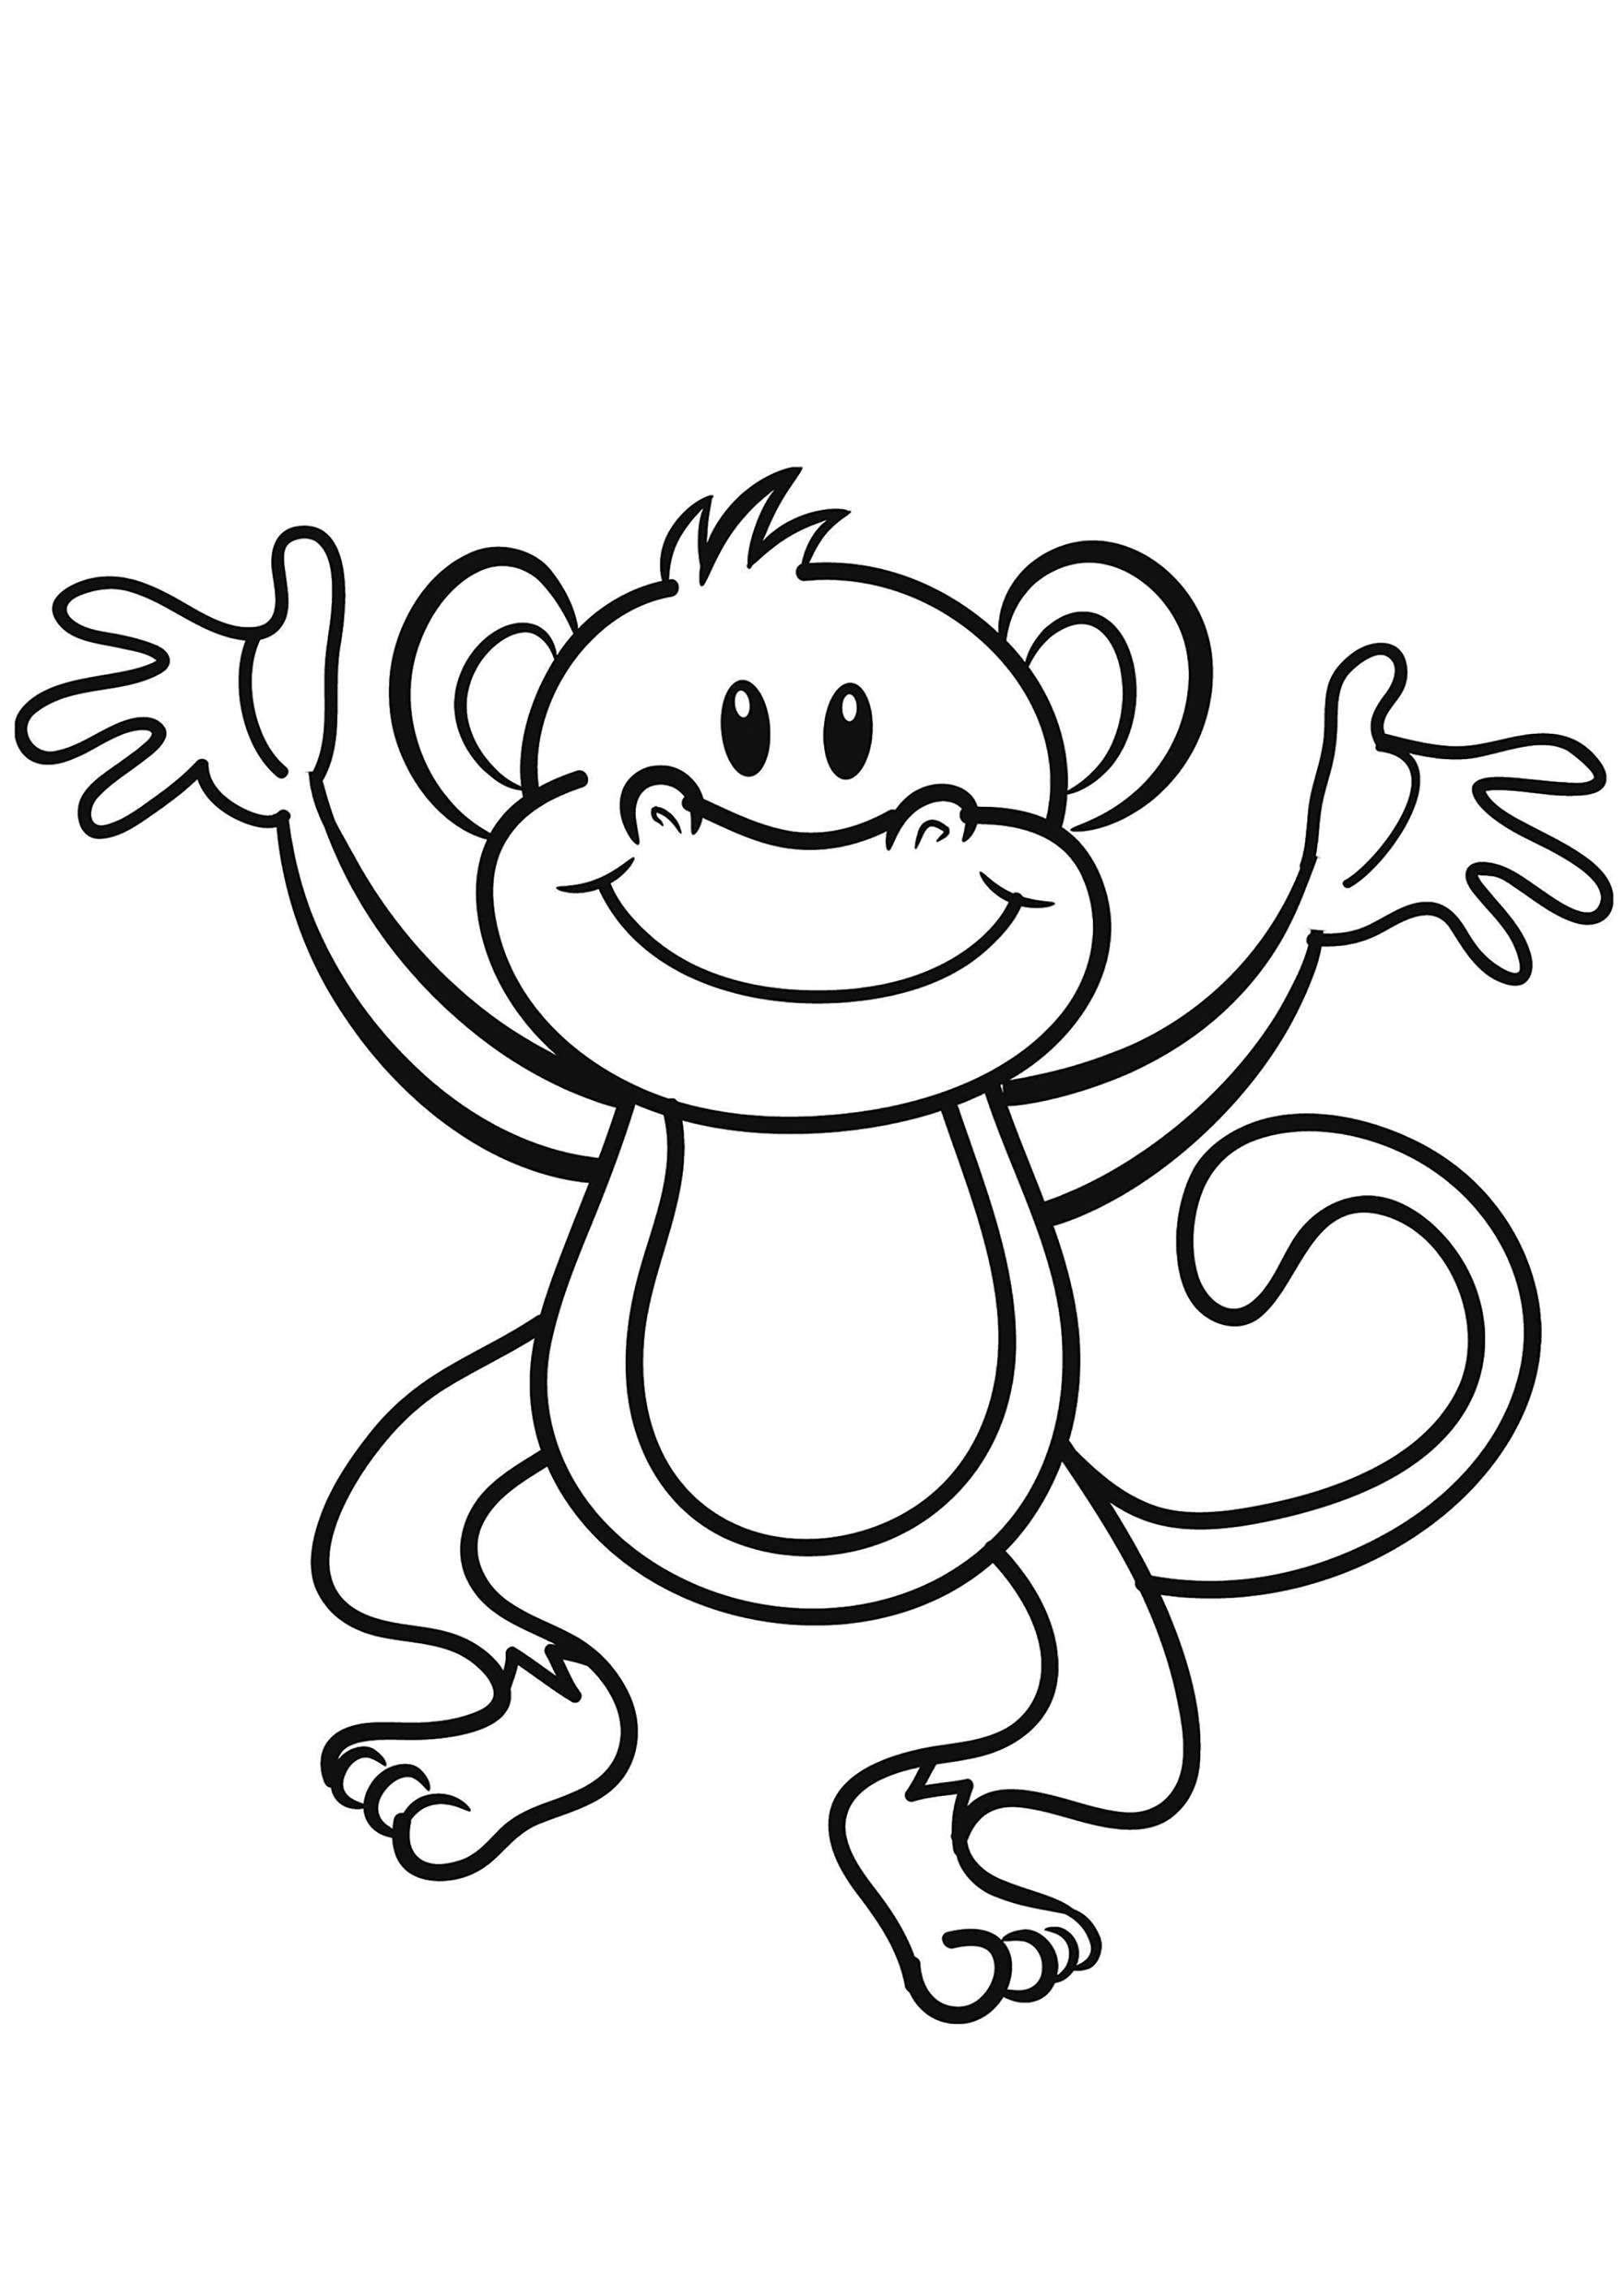 introducing-merry-monkey-colouring-pictures-focusing-on-analyze-your-tickle-spot-koifishshop